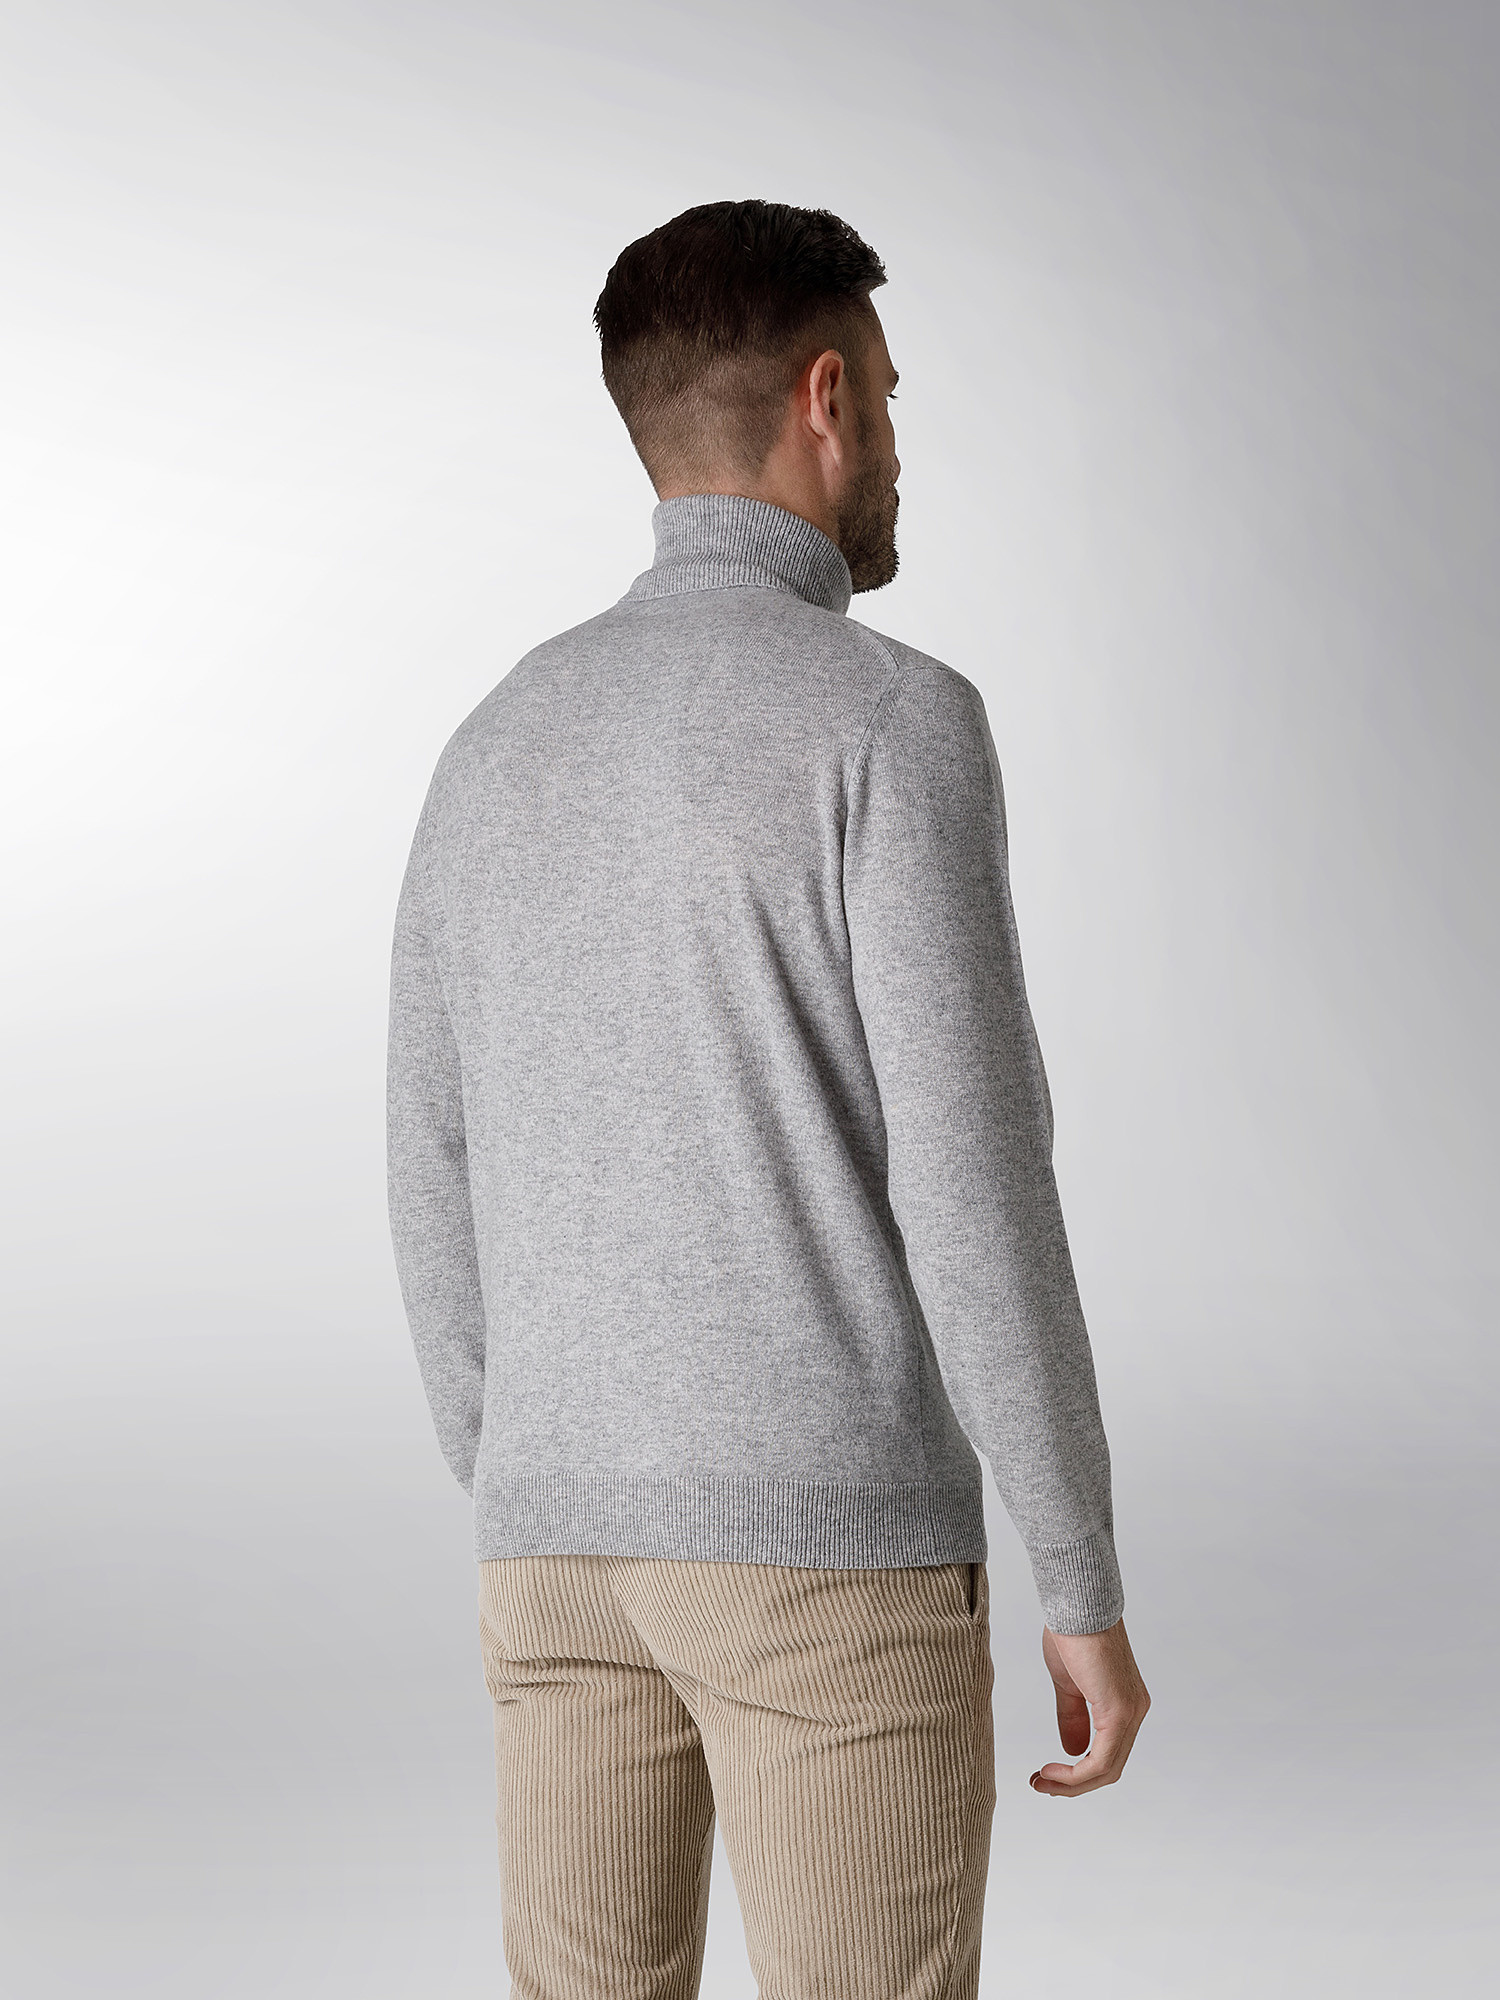 Coin Cashmere - Turtleneck in pure premium cashmere, Light Grey, large image number 2